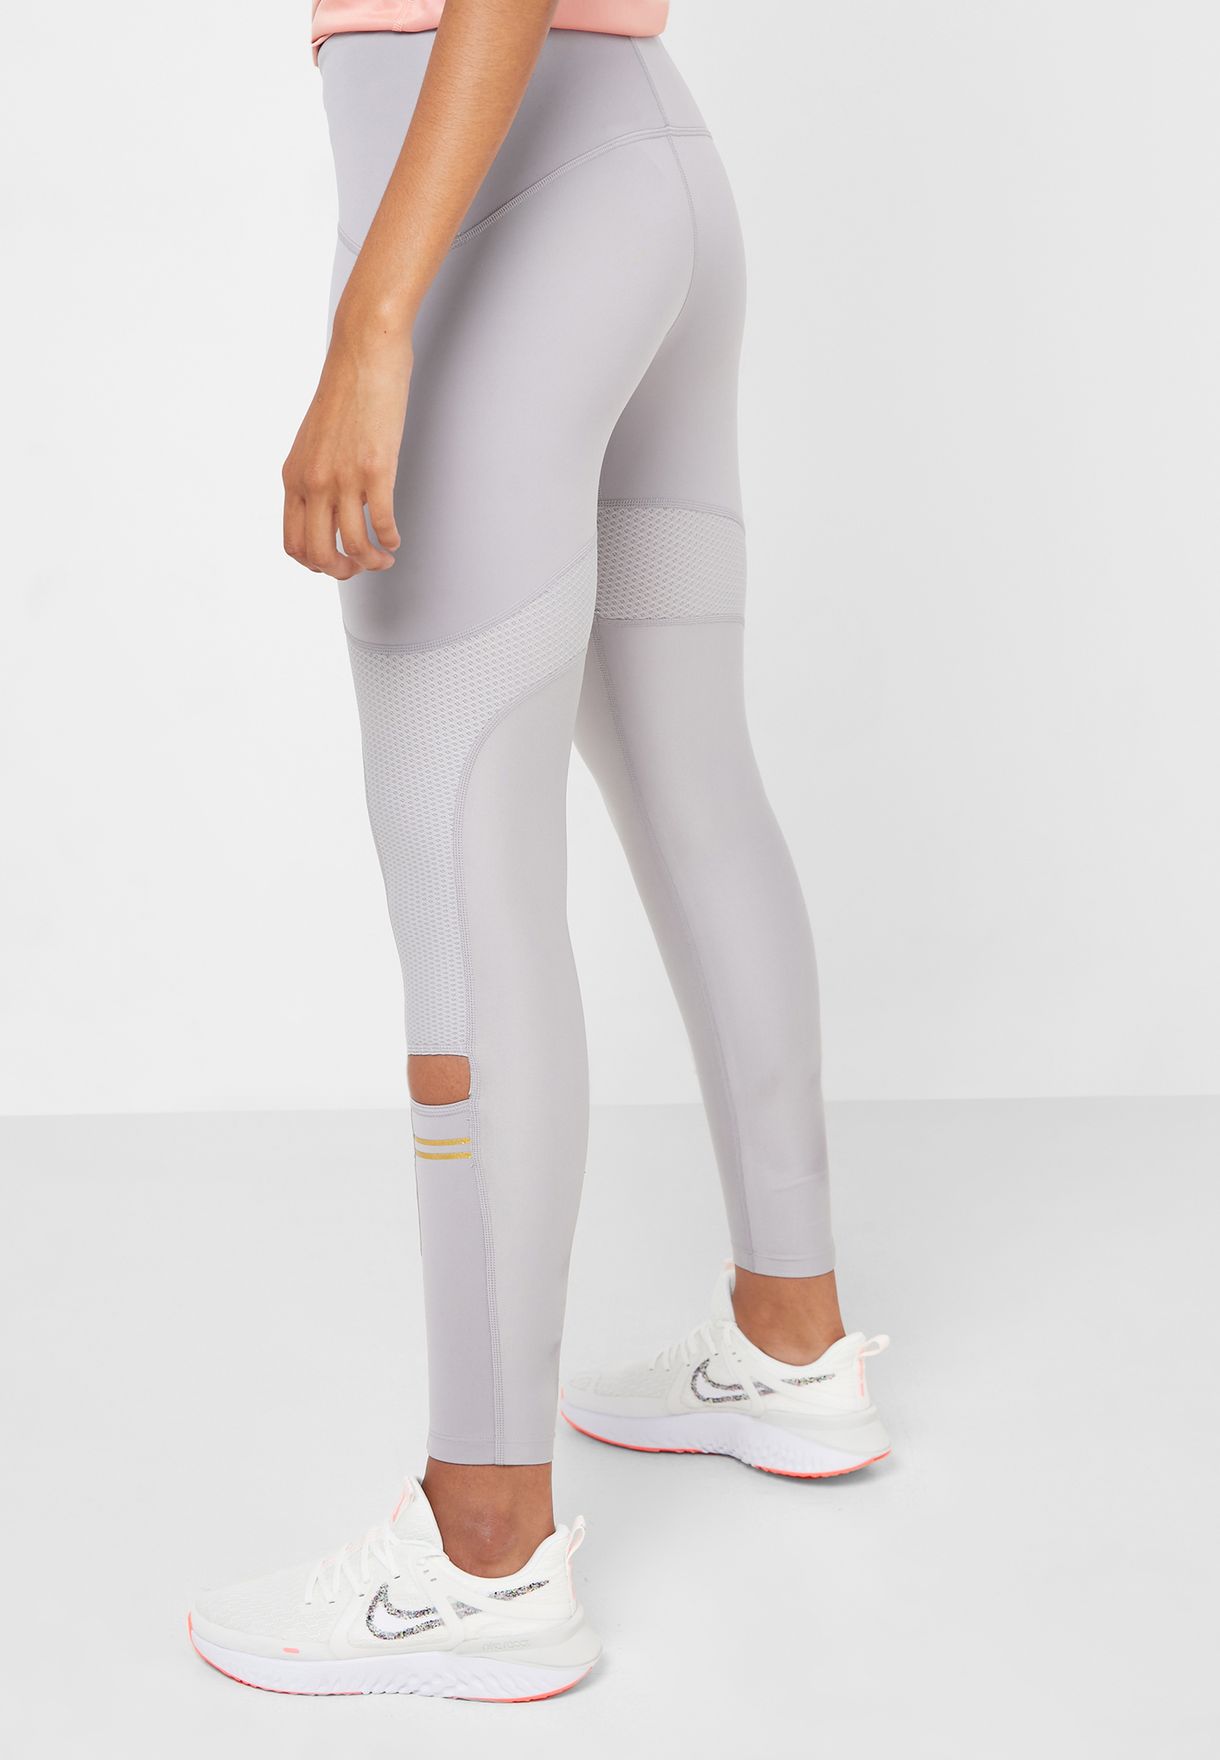 Buy Nike grey Glam Speed 7/8 Tights for 